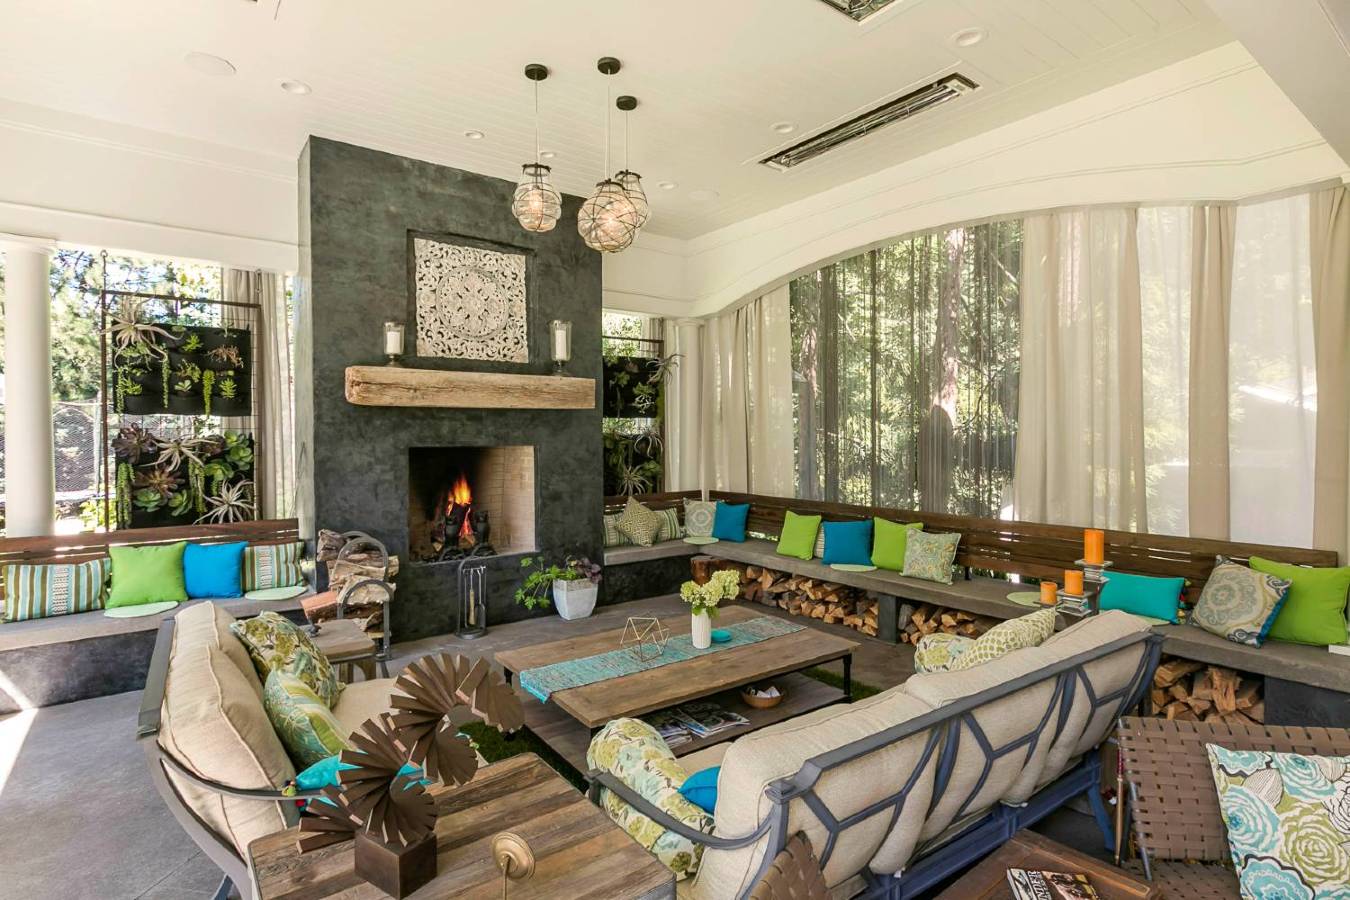 A charming outdoor patio with full ceiling and fireplace.